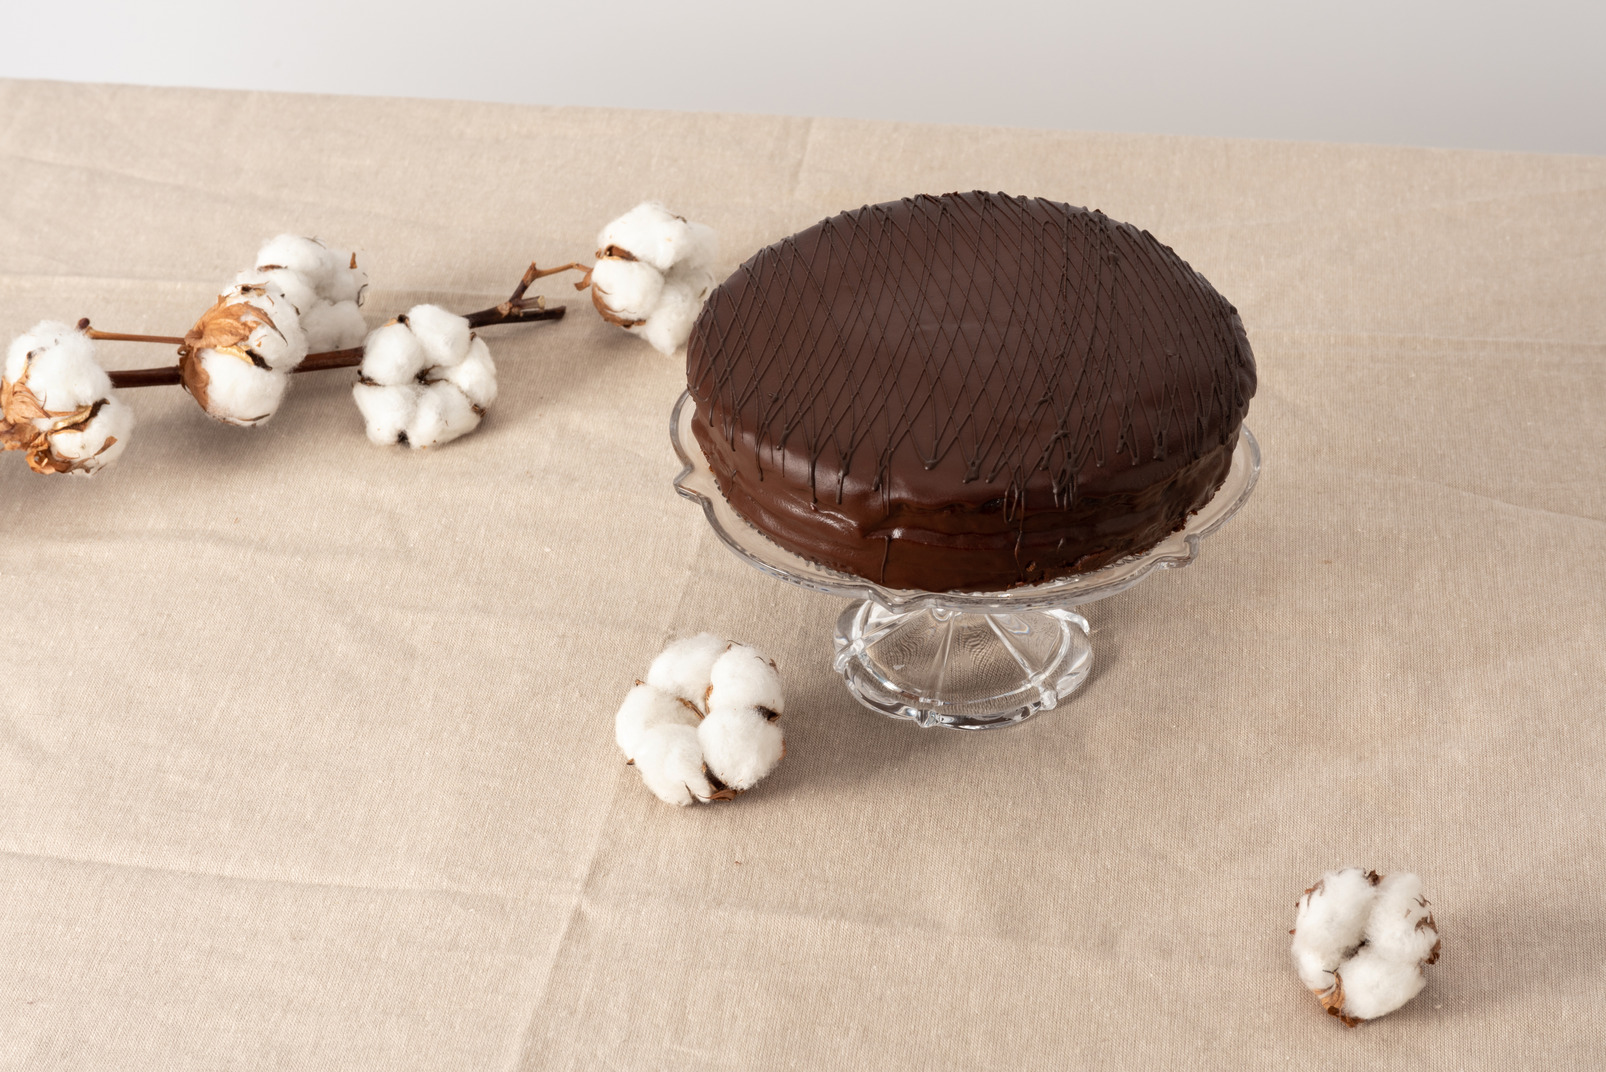 How about chocolate cake?